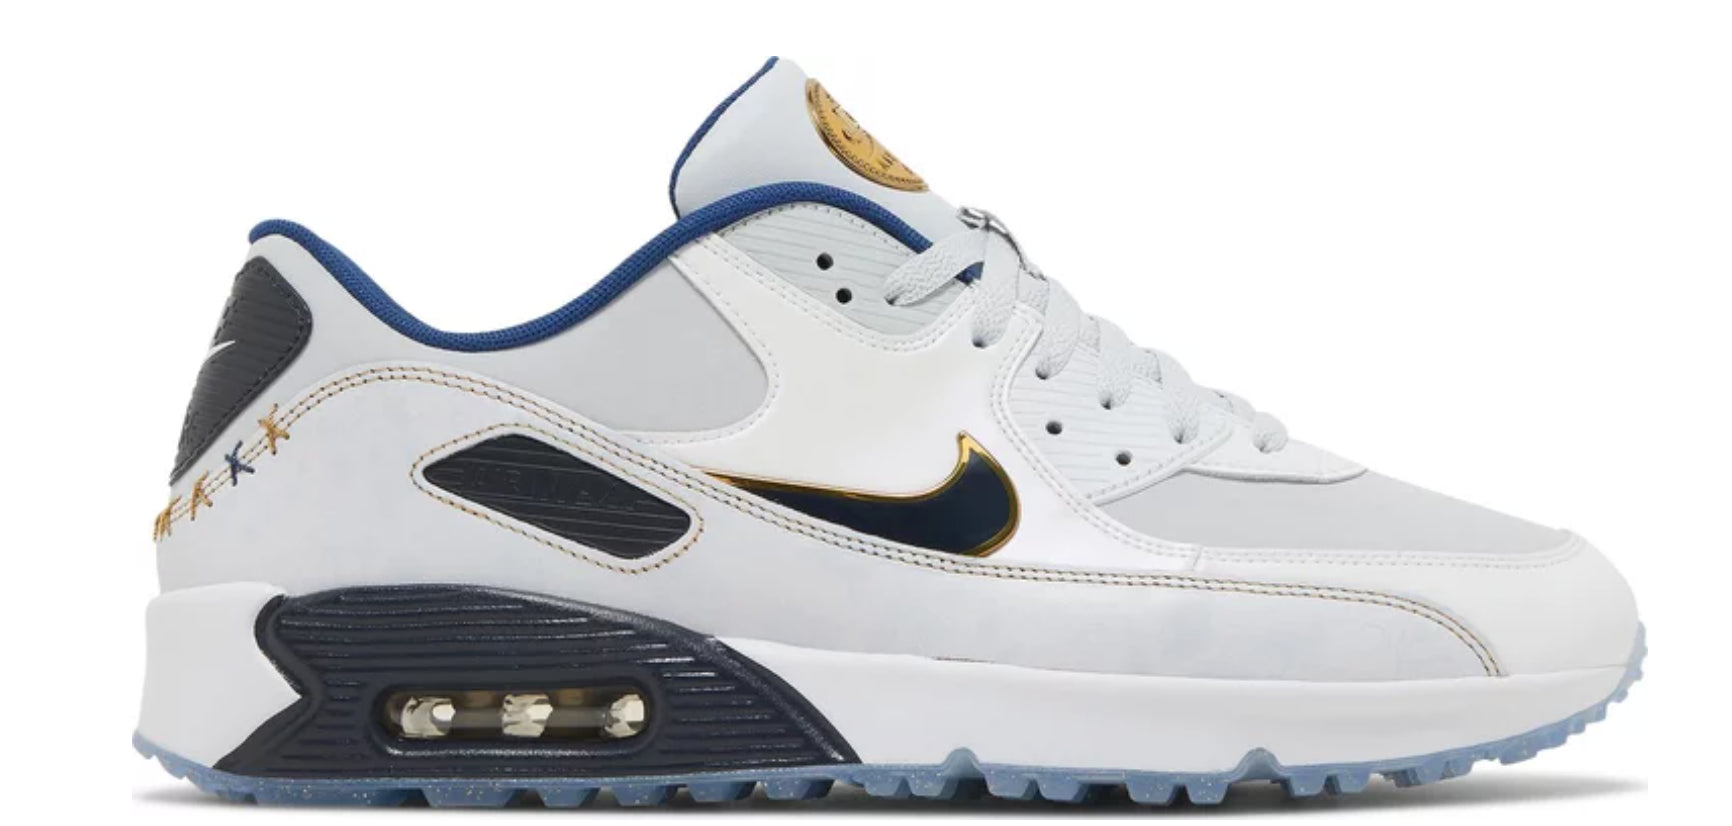 Nike Men's Air Max 90 Golf NRG 'The Players Championship' Sneakers